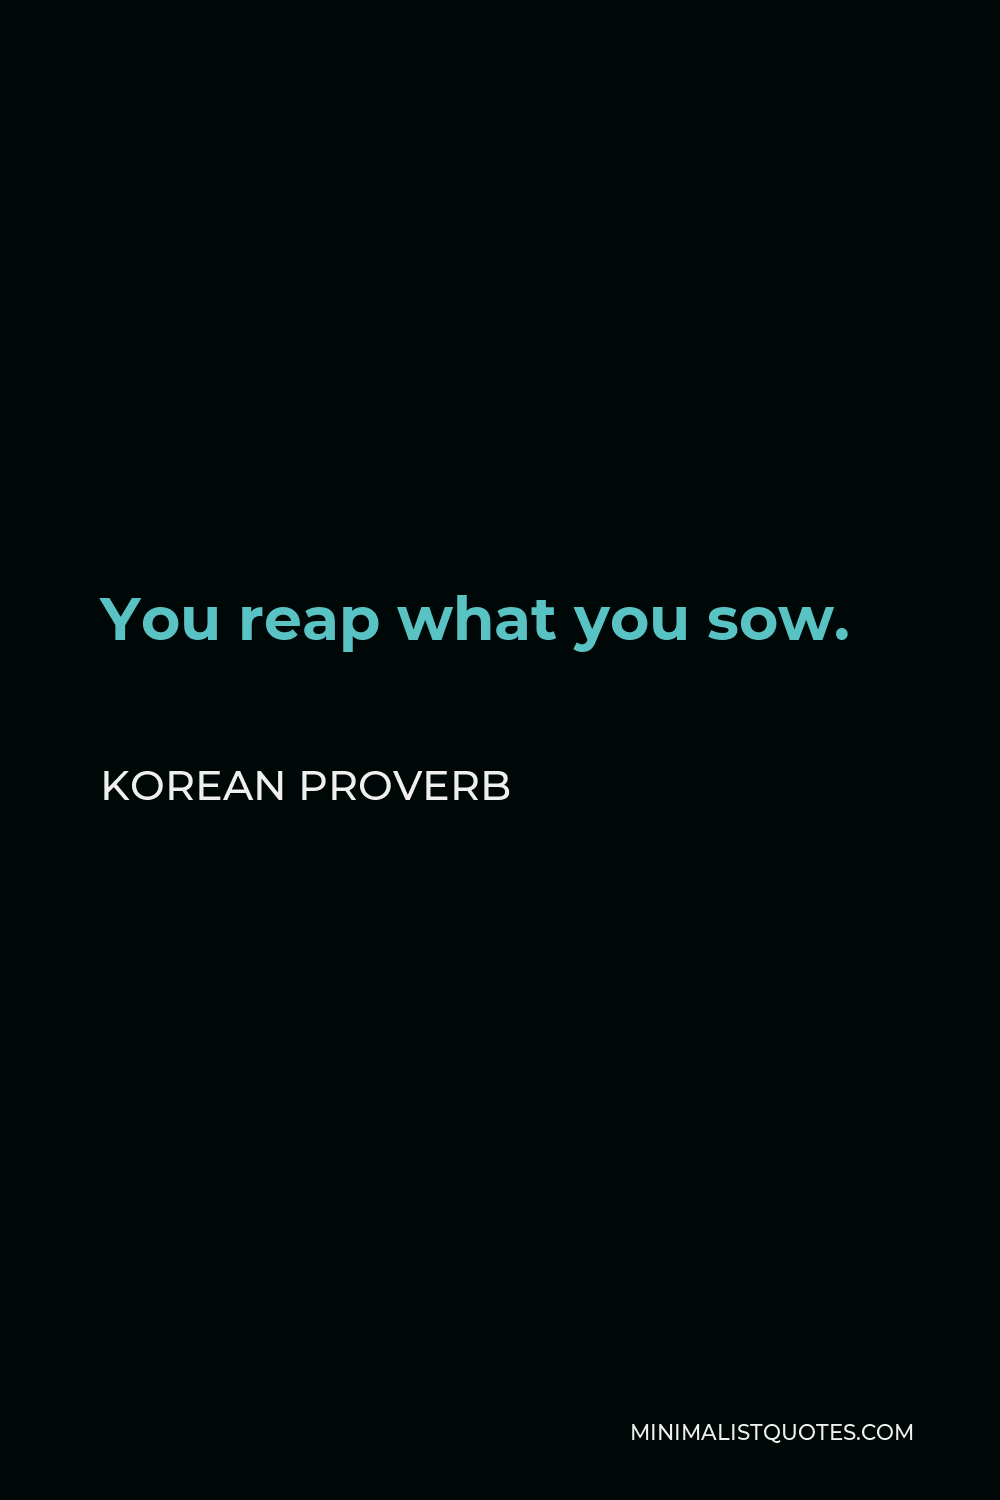 Korean Proverb Quote - You reap what you sow.